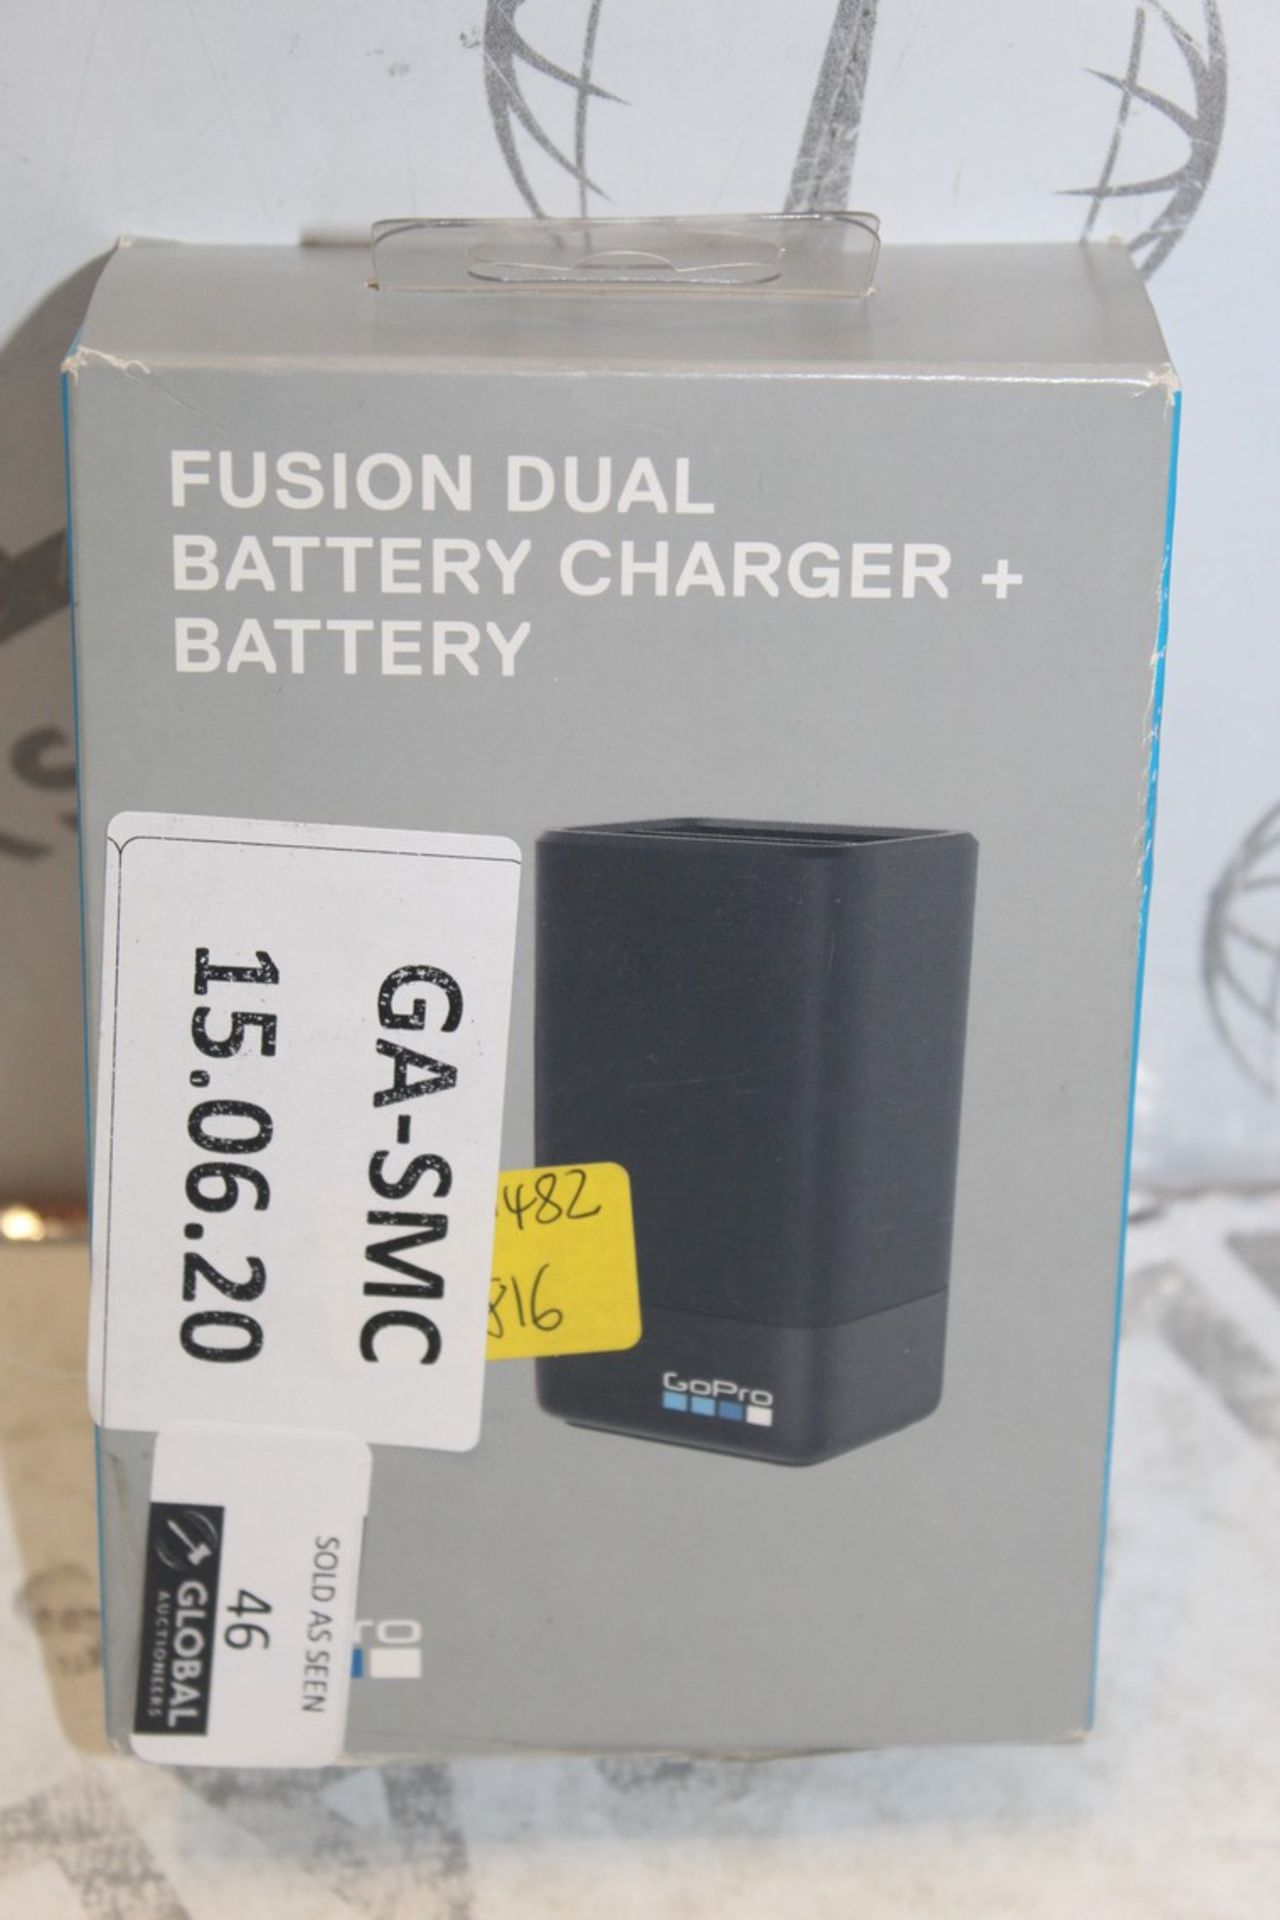 Boxed Gopro Fushion Dual Battery Charger With Port